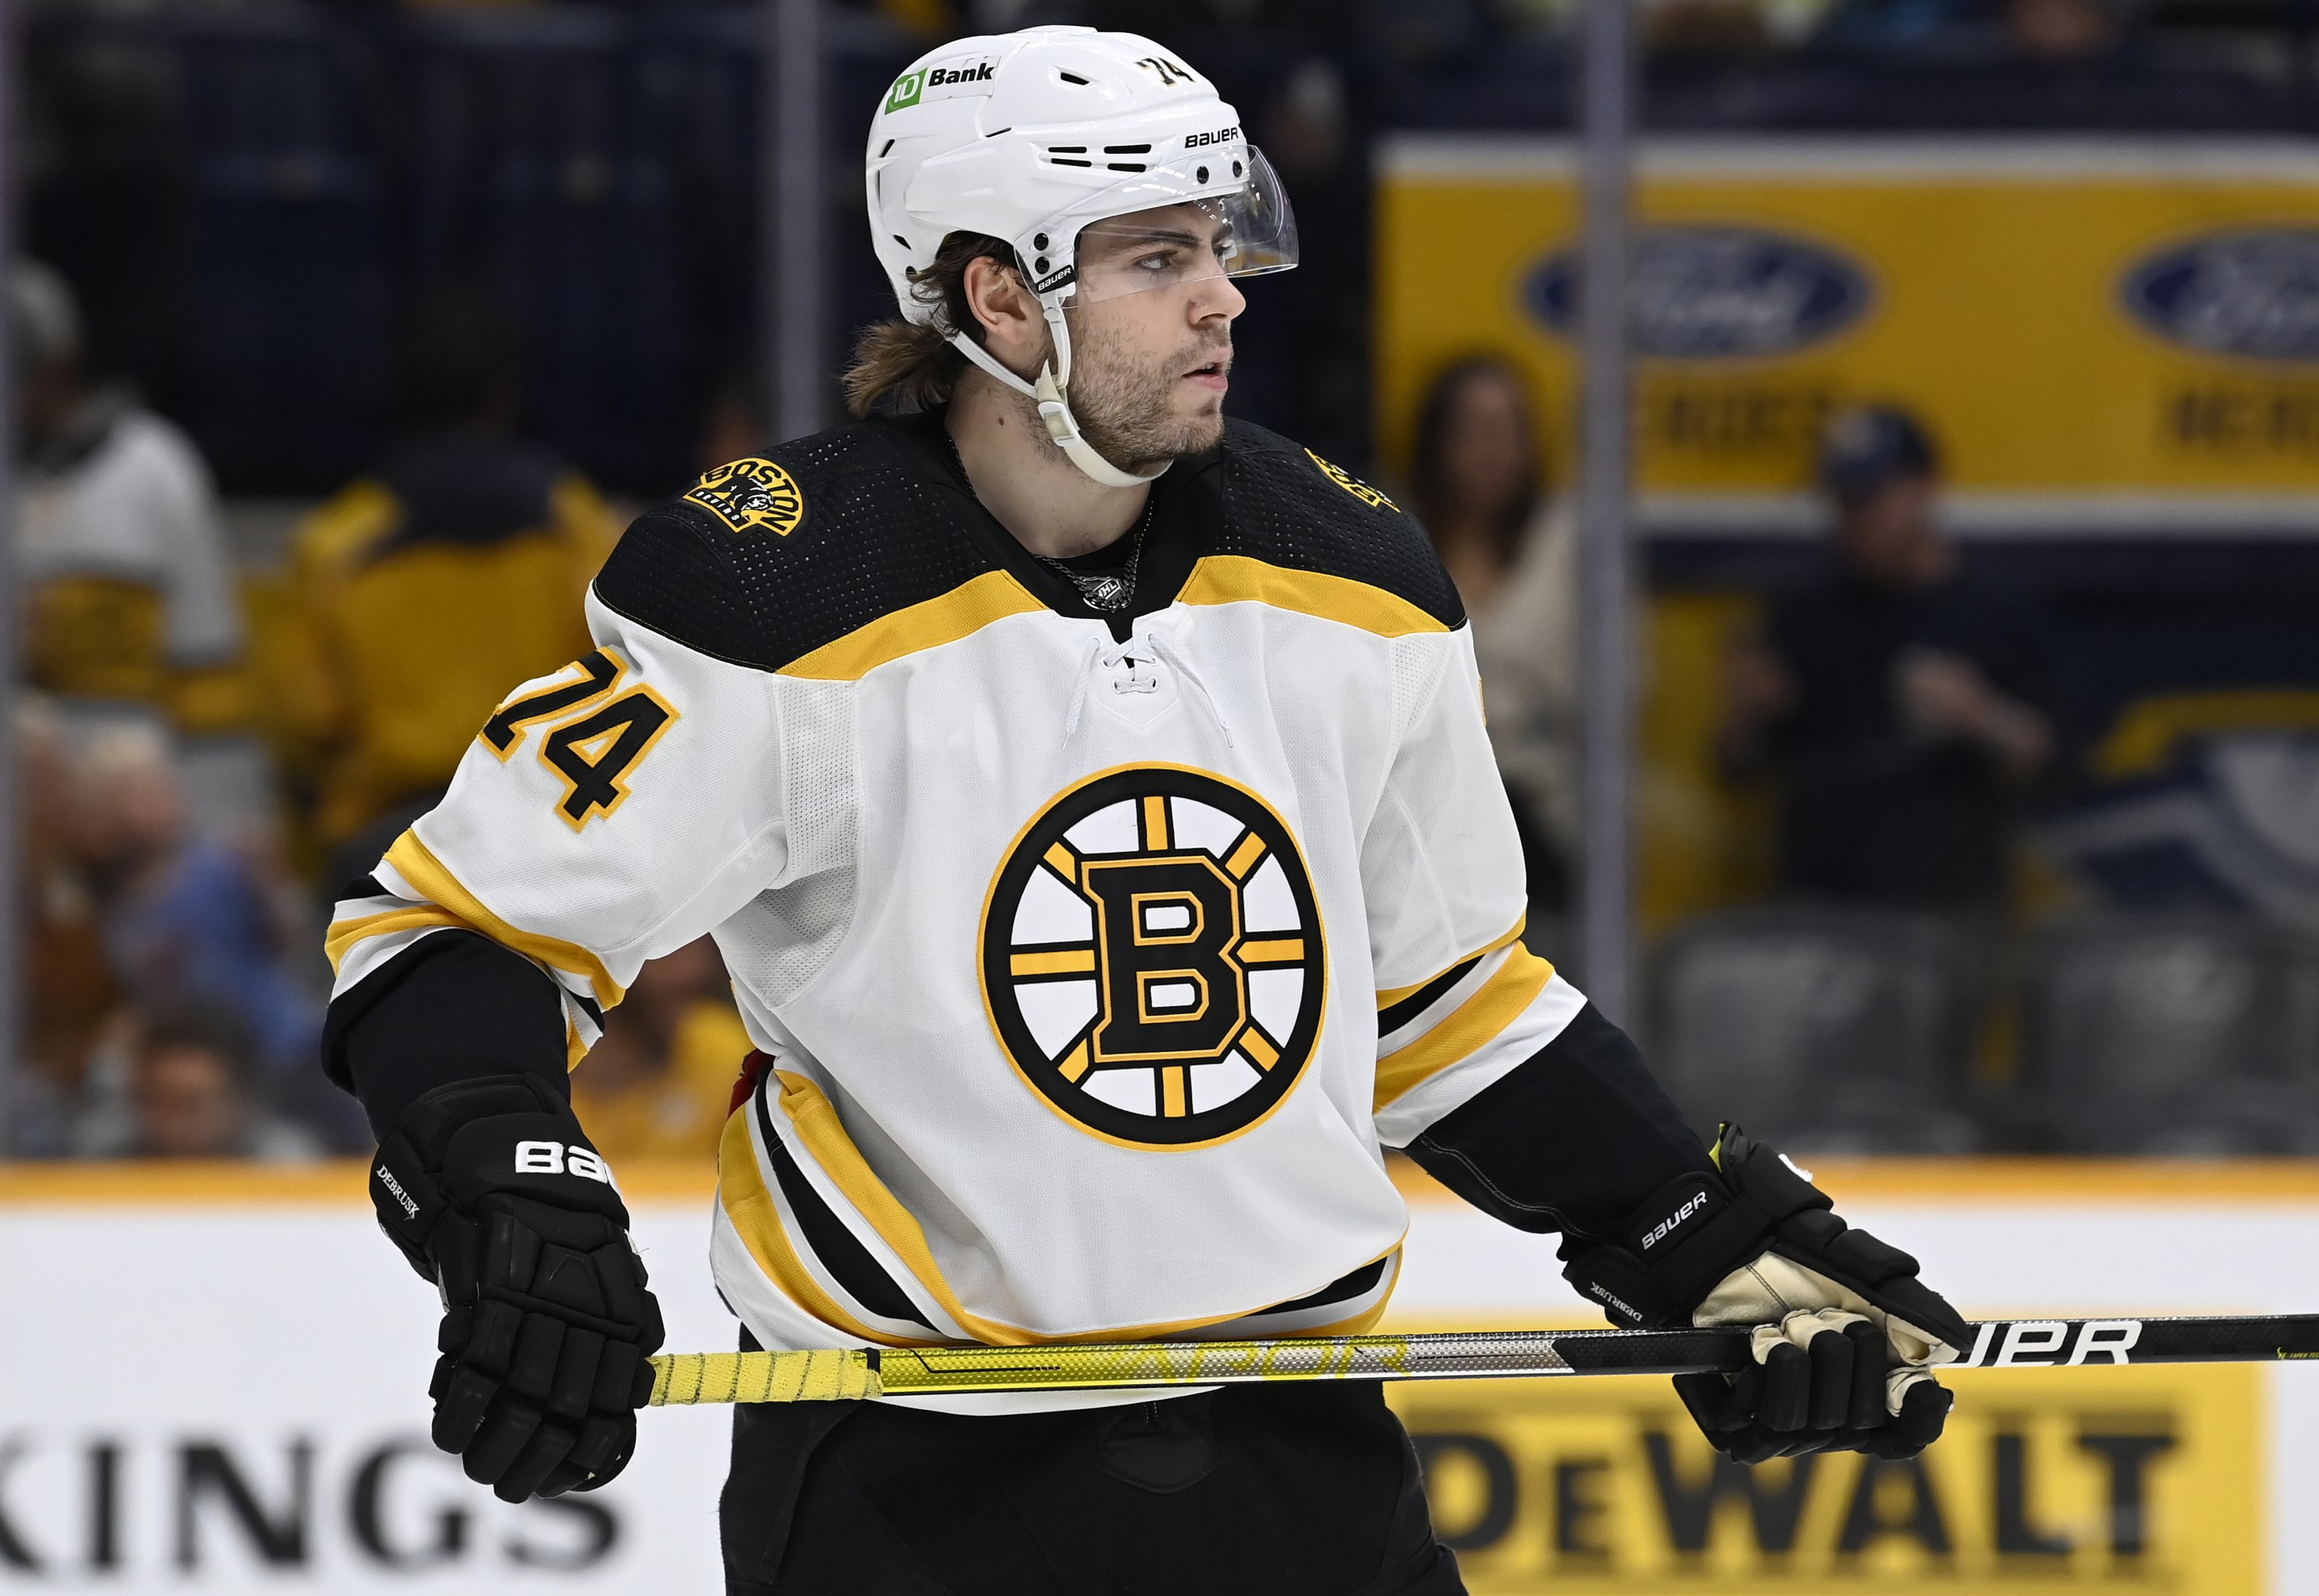 DeBrusk puts his stamp on the series with 2 goals in Game 7 